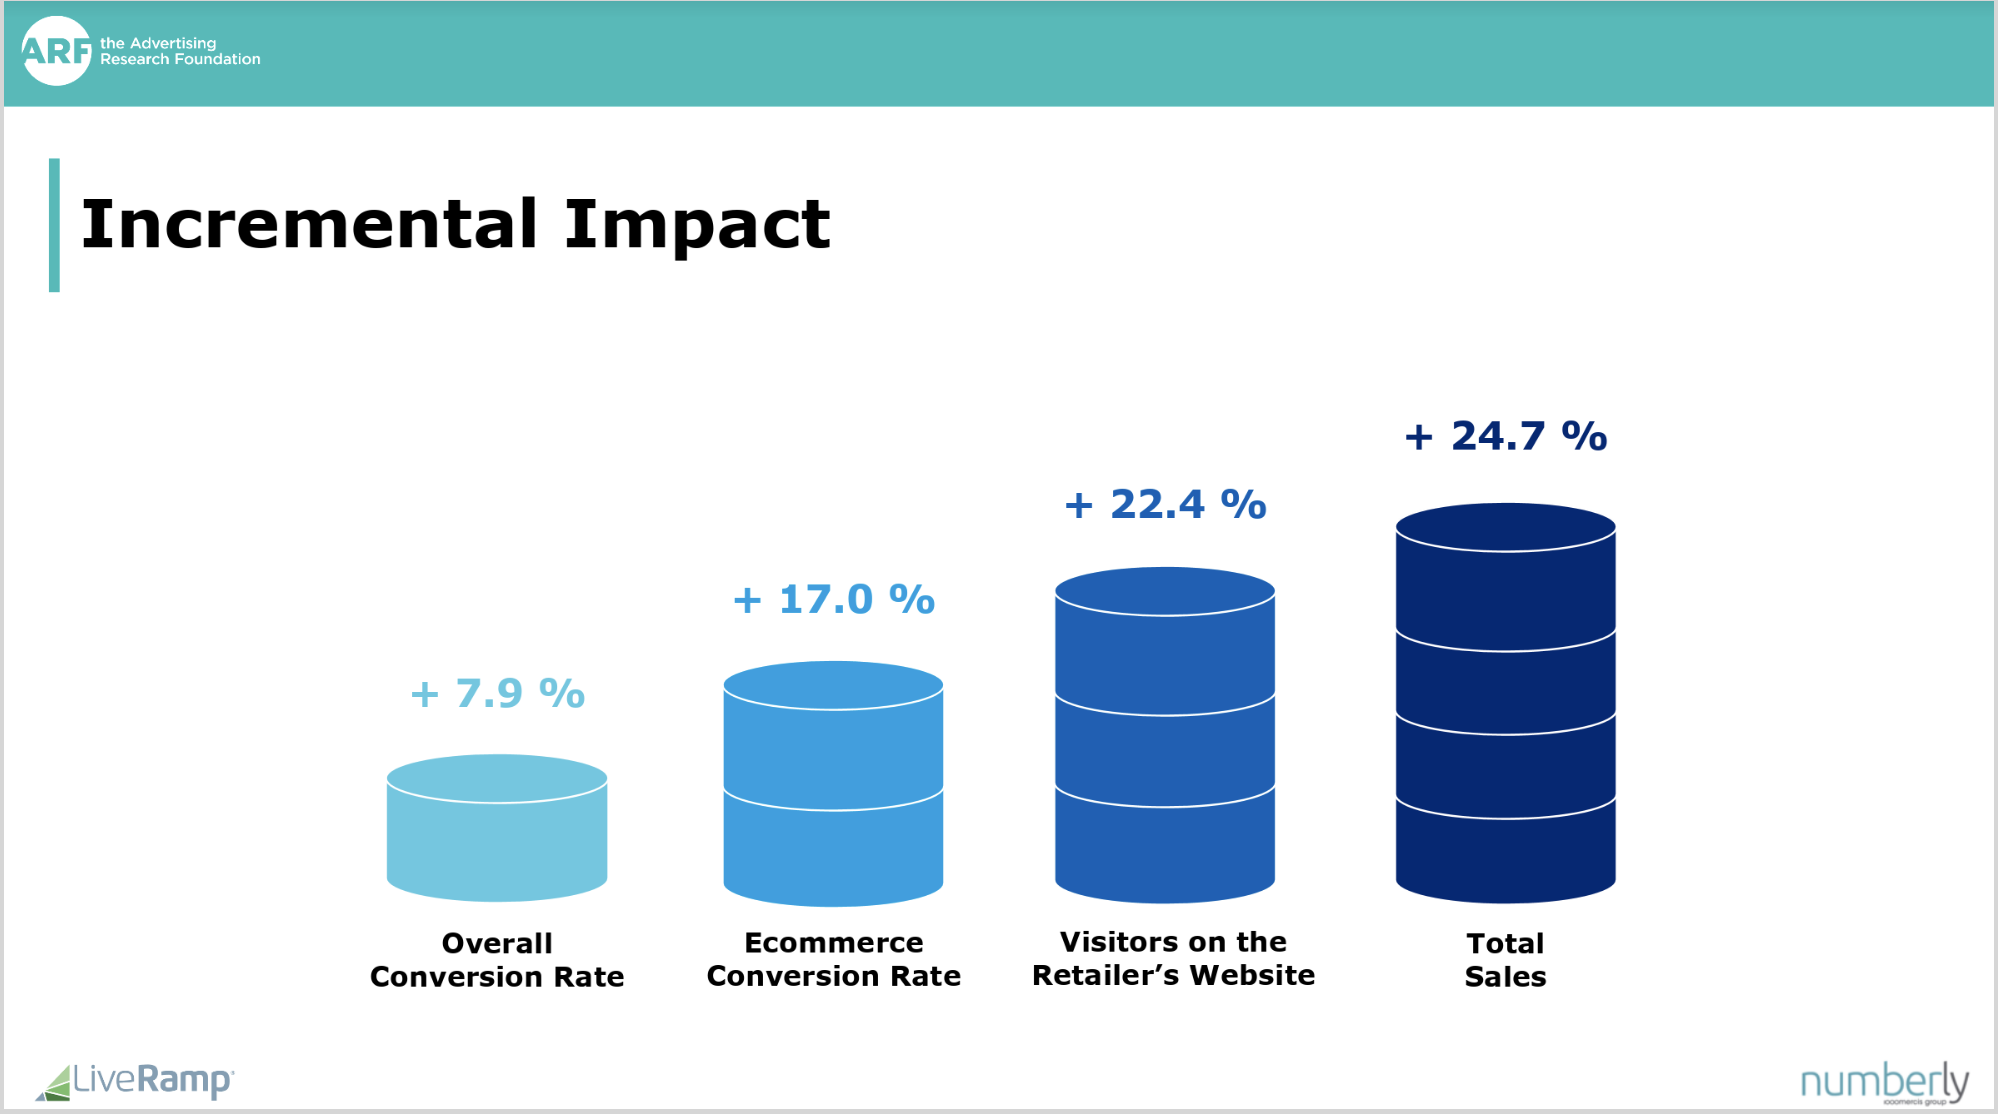 Incremental Impact: +7.9% in overall conversion rate, +17.0% in ecommerce conversion rate, +22.4% in visitors on the retailer's website, +24.7% in total sales